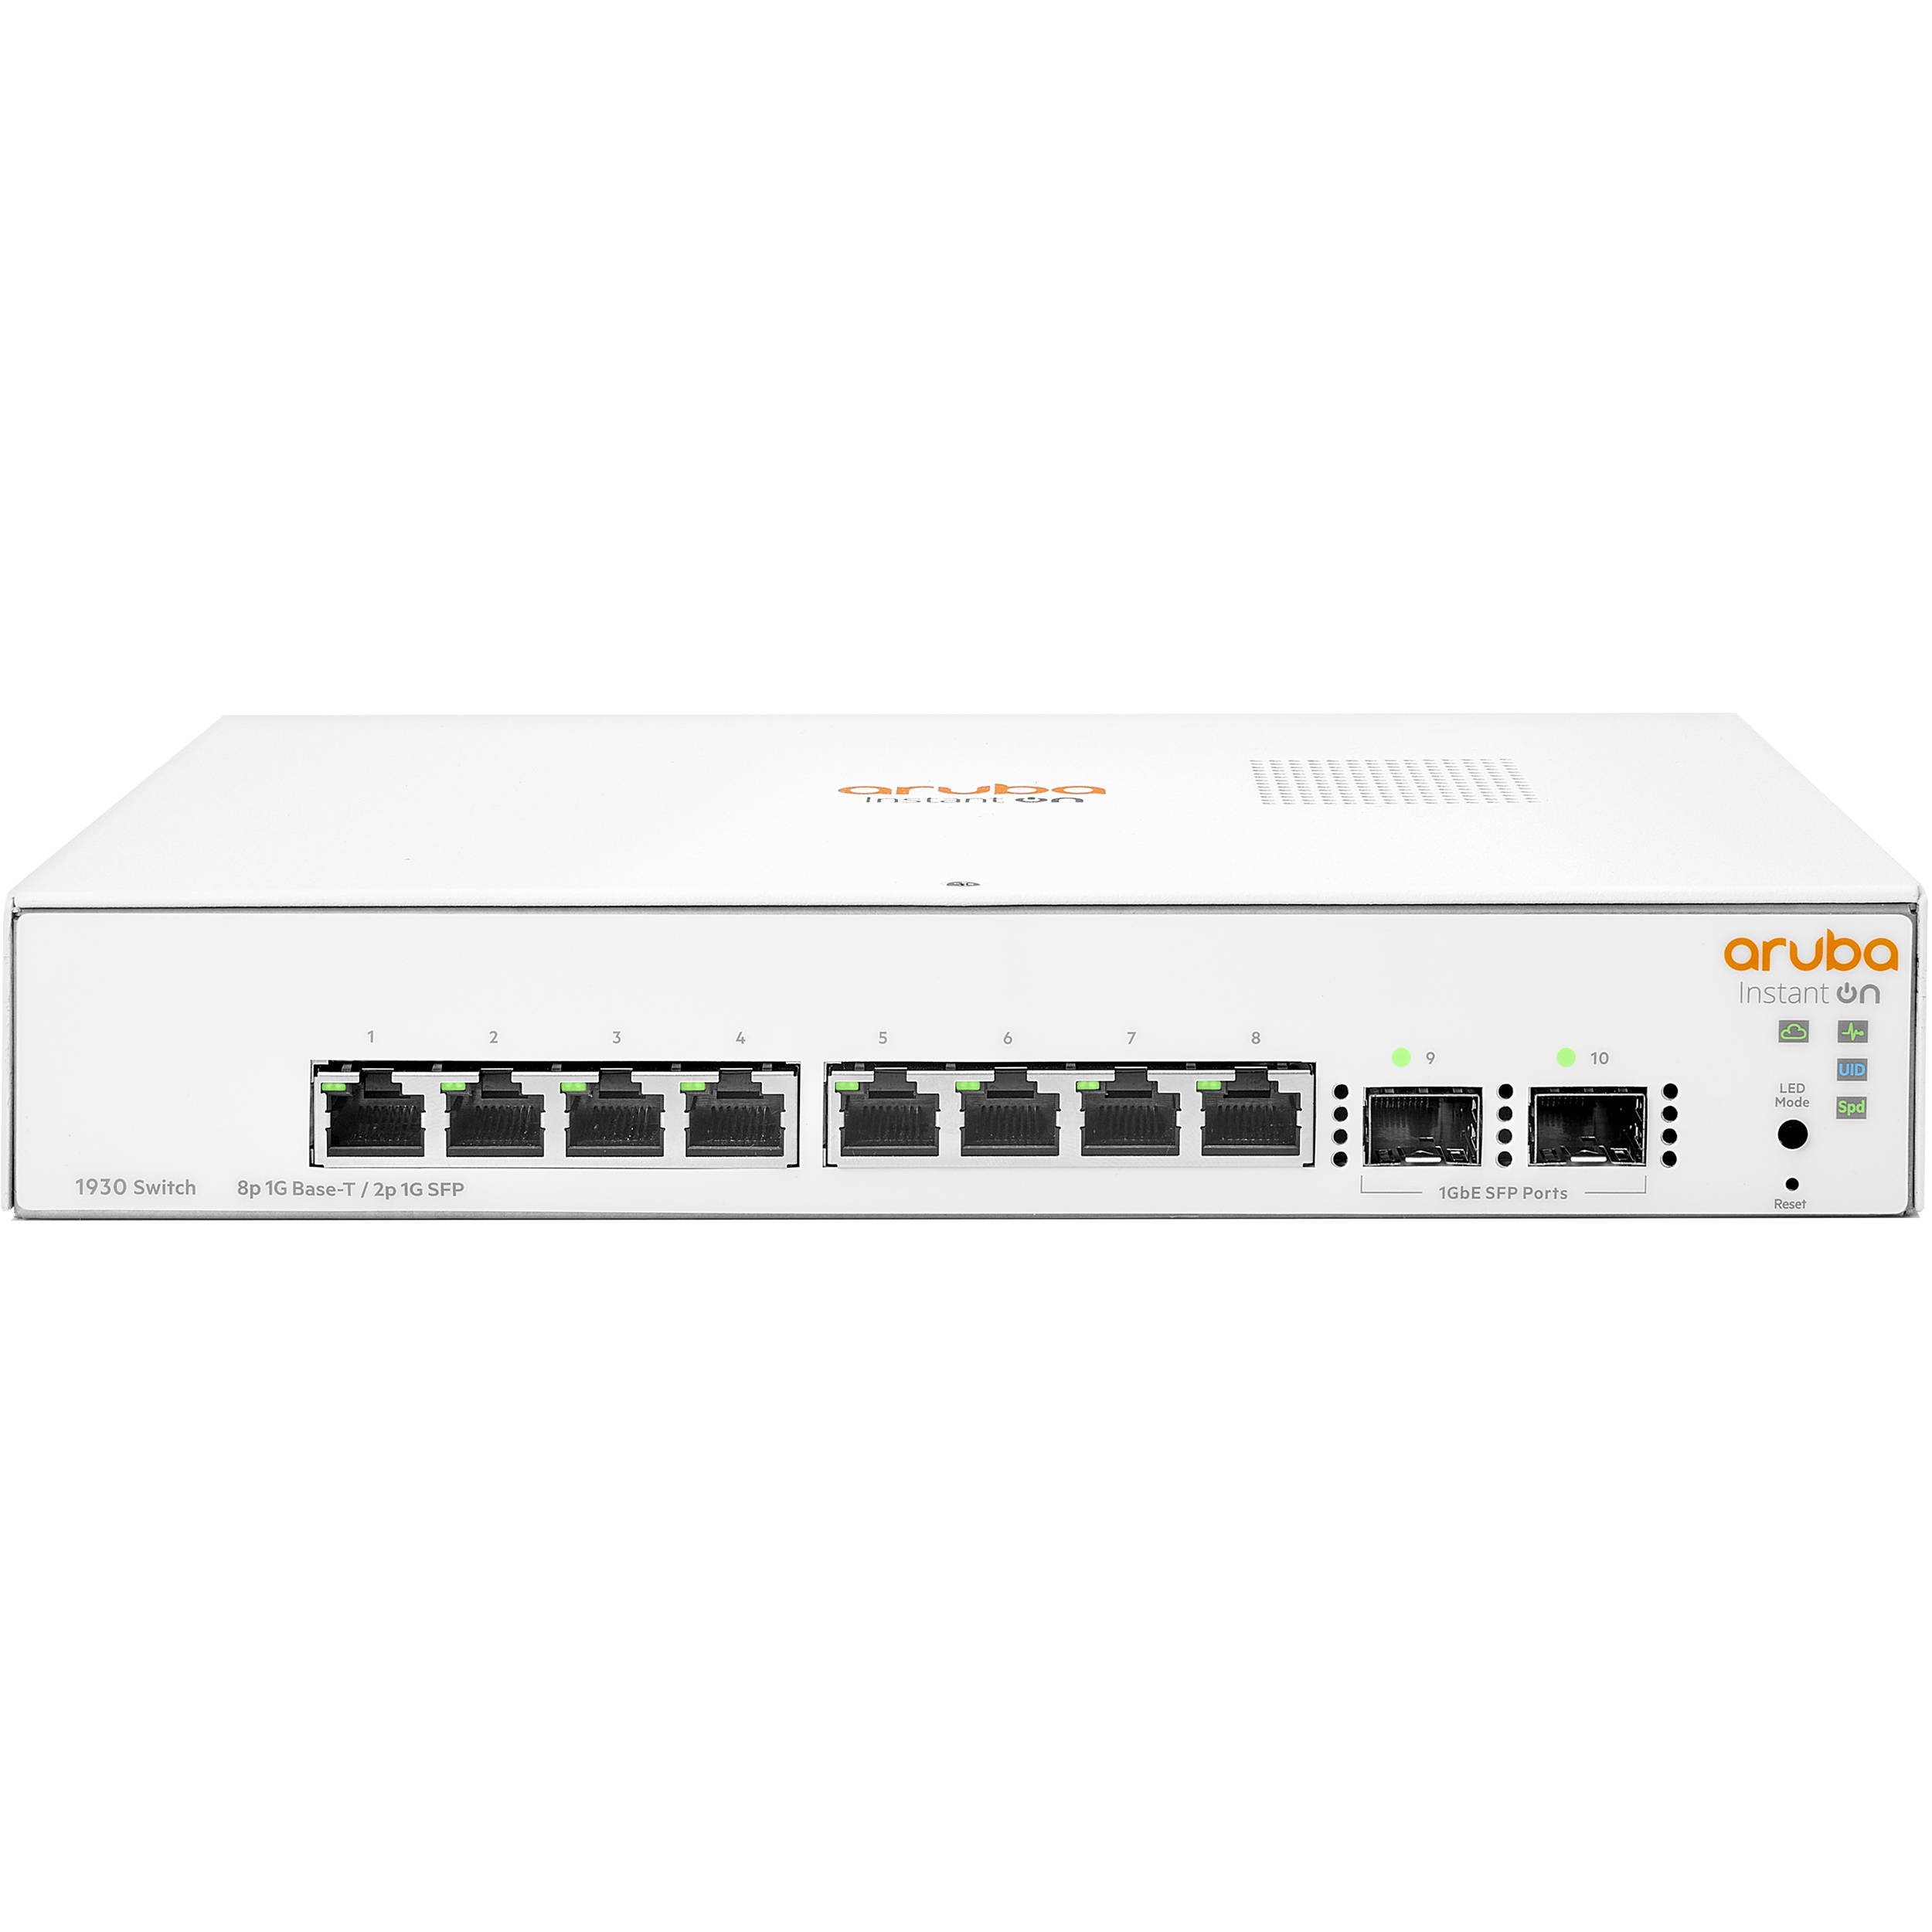 JL680A | 8-Port Gigabit Managed Switch with SFP